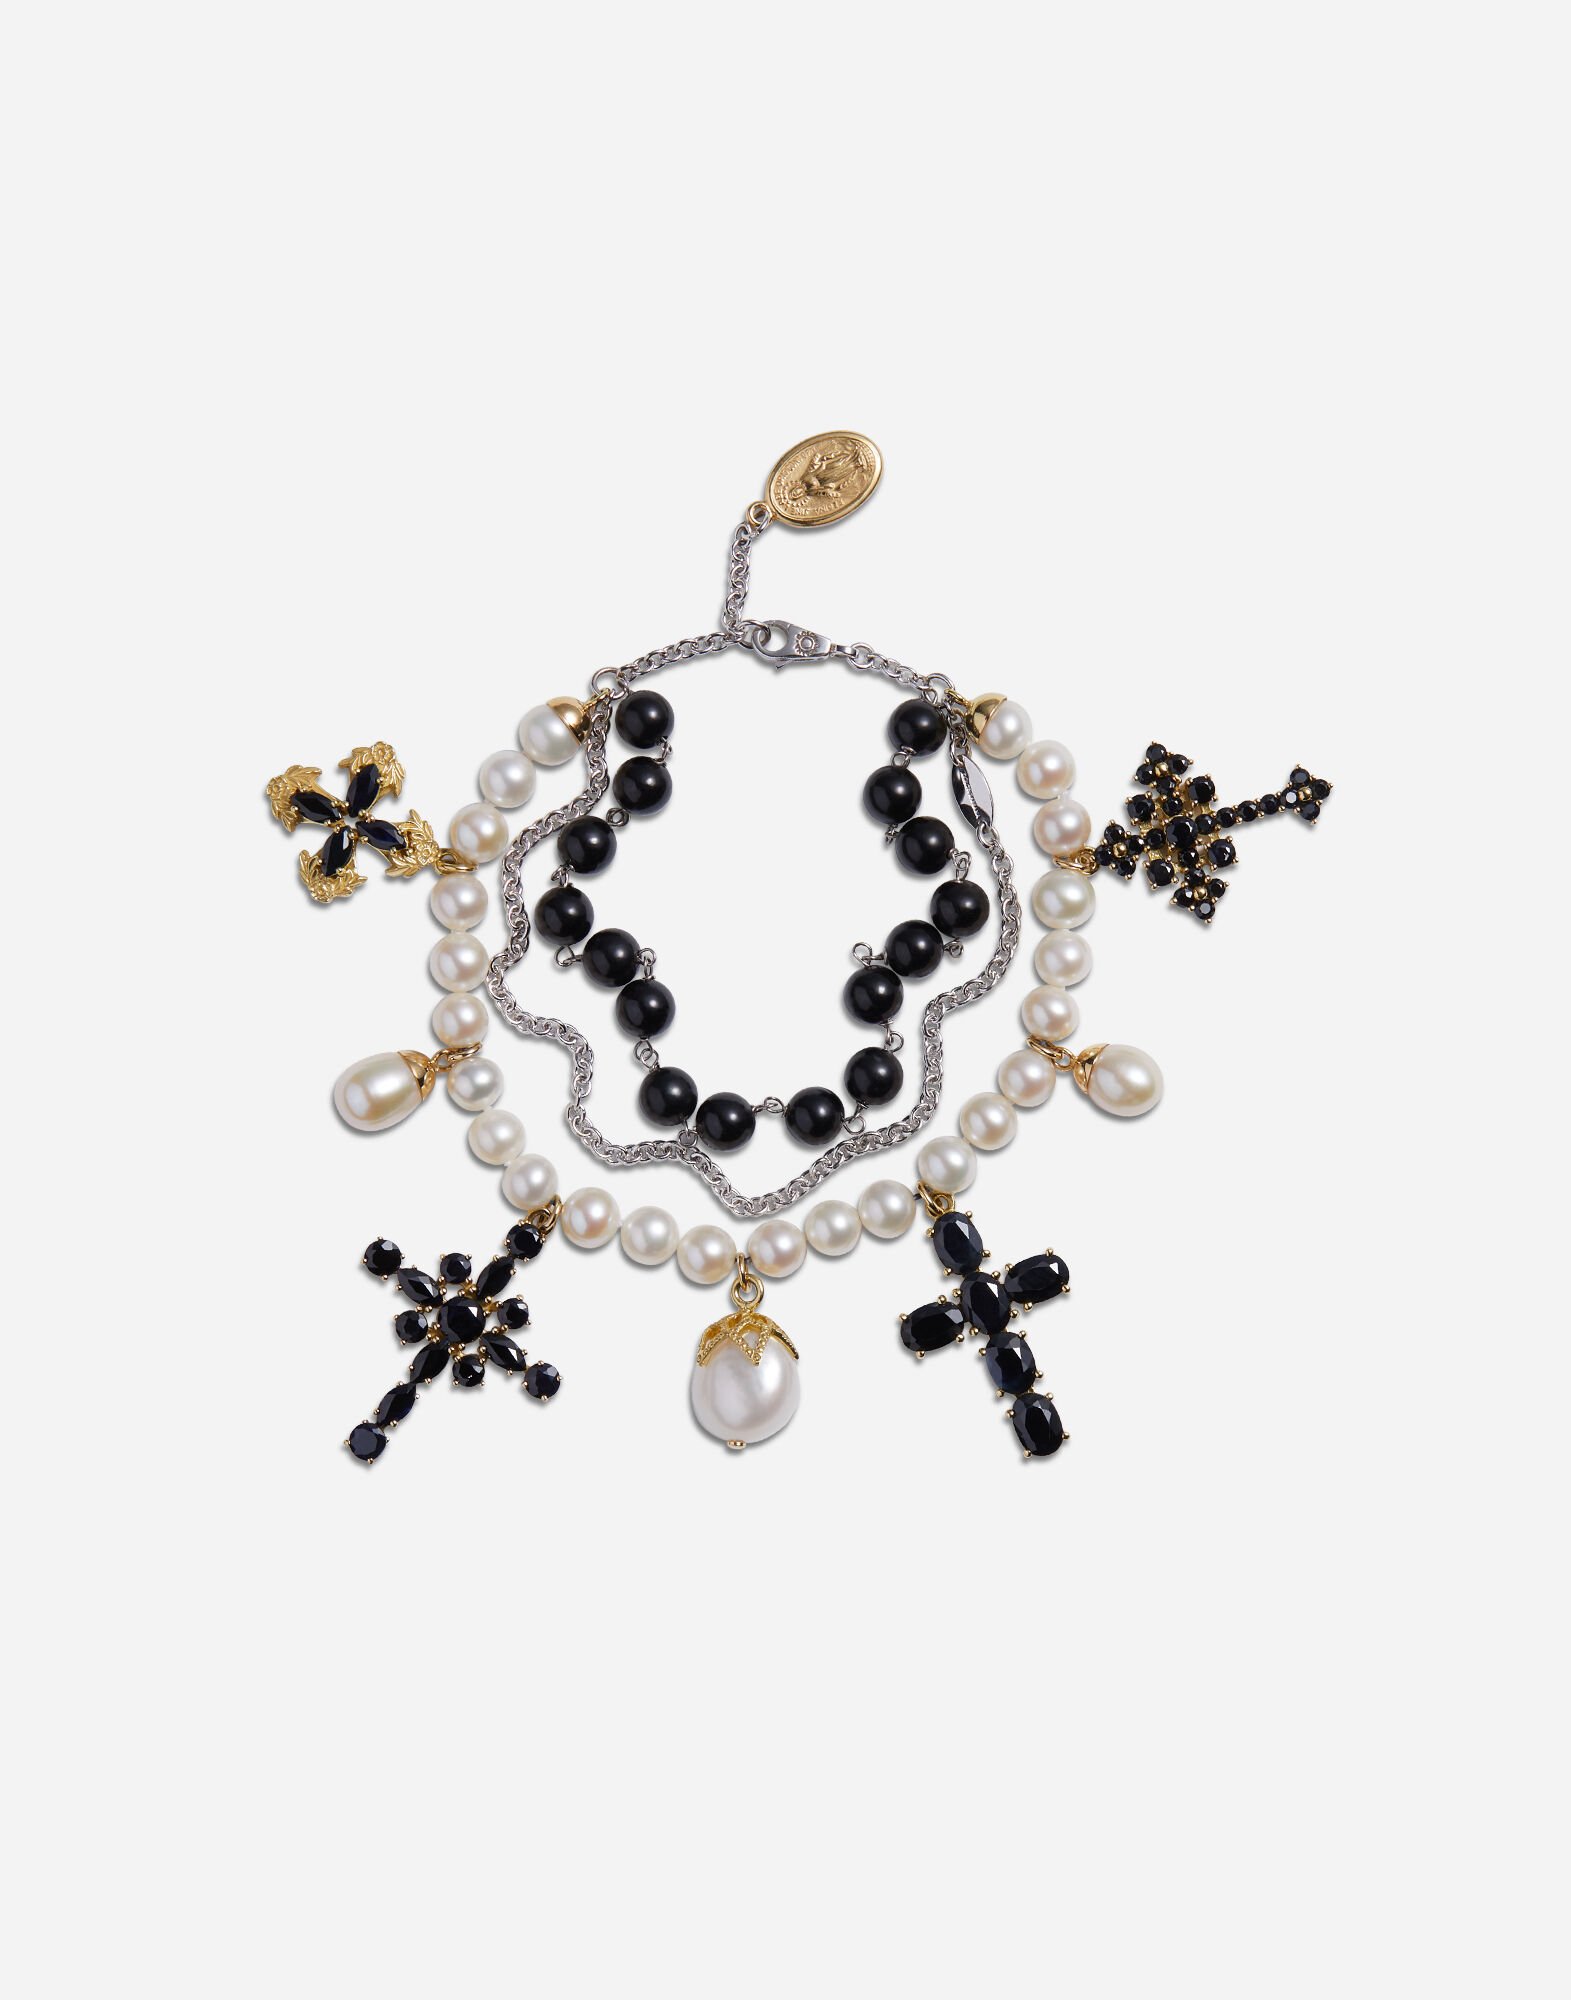 Dolce & Gabbana Yellow and white gold family bracelet with cblack sapphire, pearl and black jade beads Weiss WBQA1GWTSQS